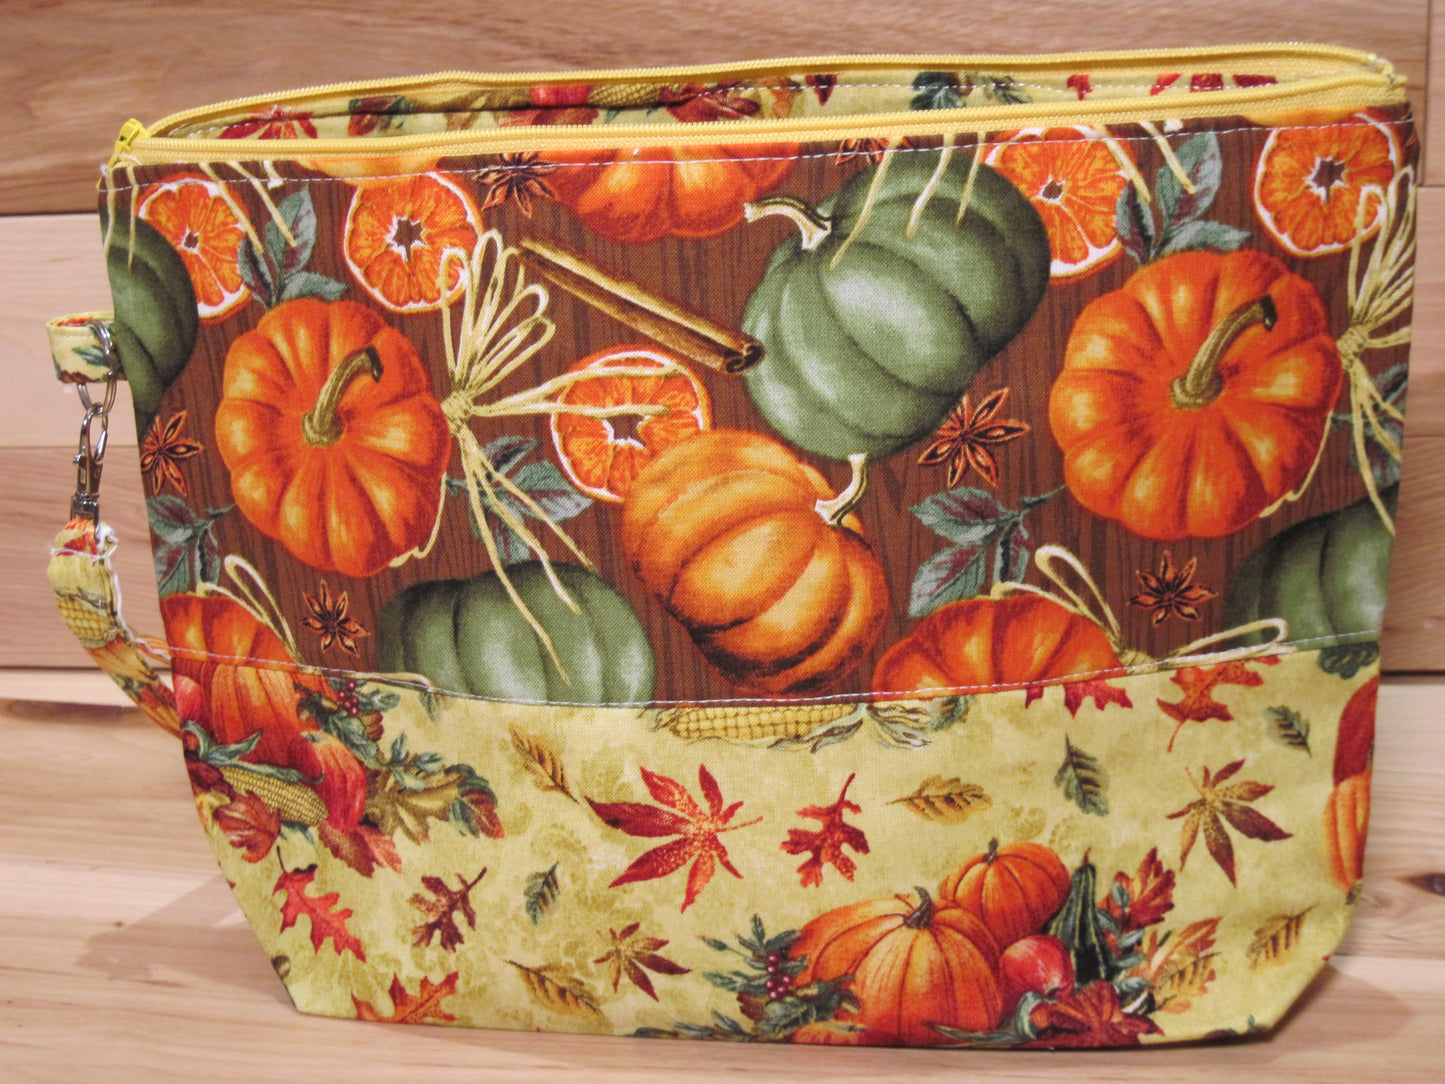 Medium Pumpkin & Leaves with inside pocket project bags